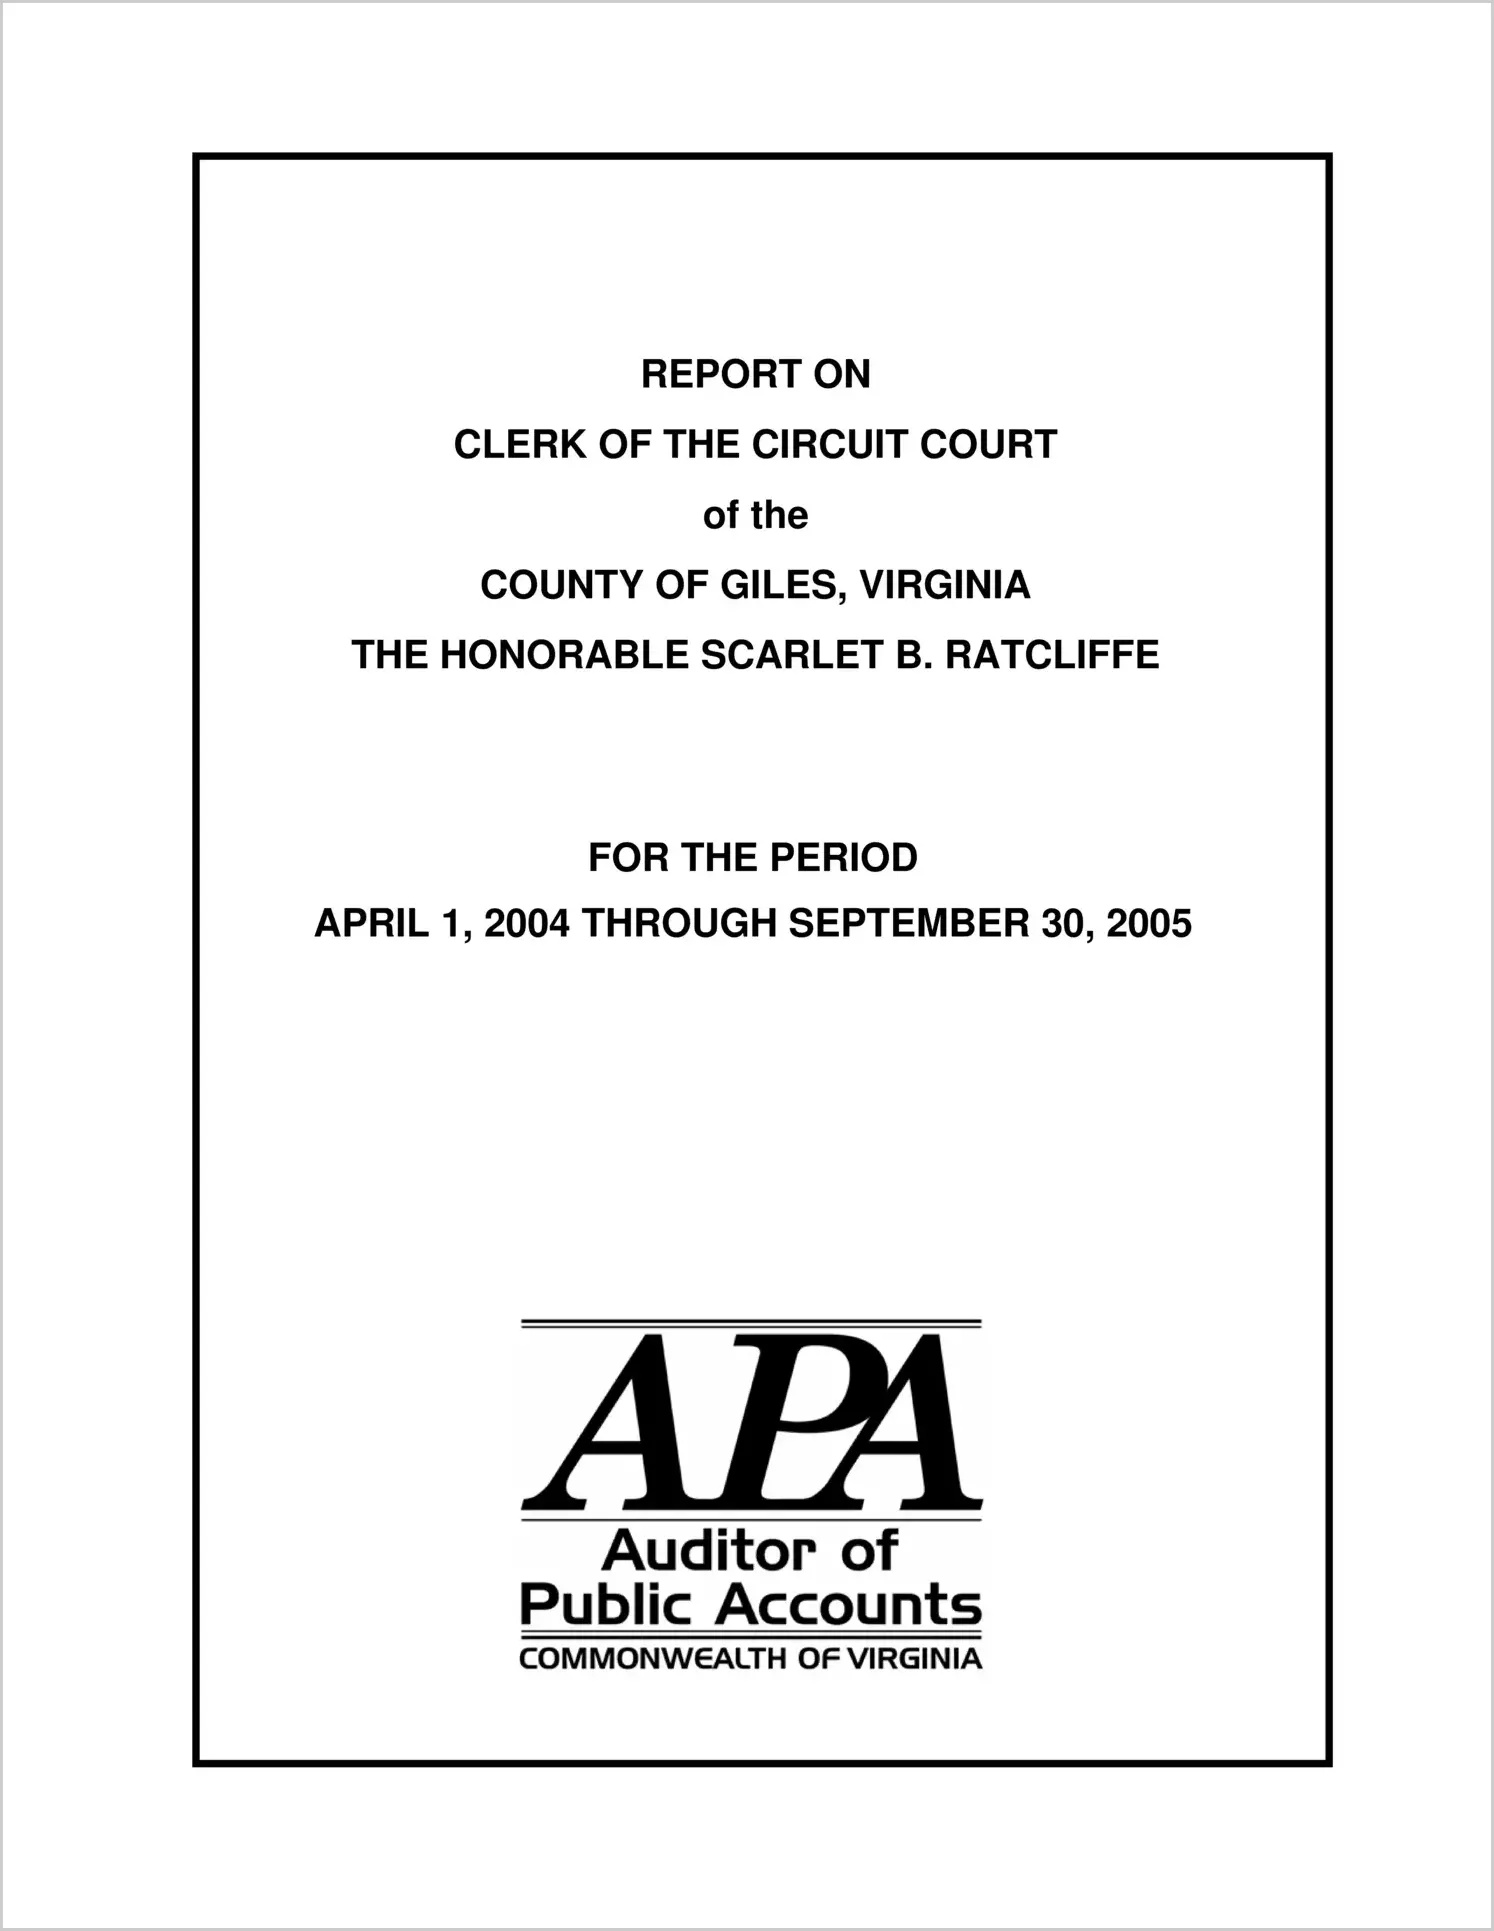 Clerk of the Circuit Court of the County of Bath for the period April 1, 2004 through September 30, 2005